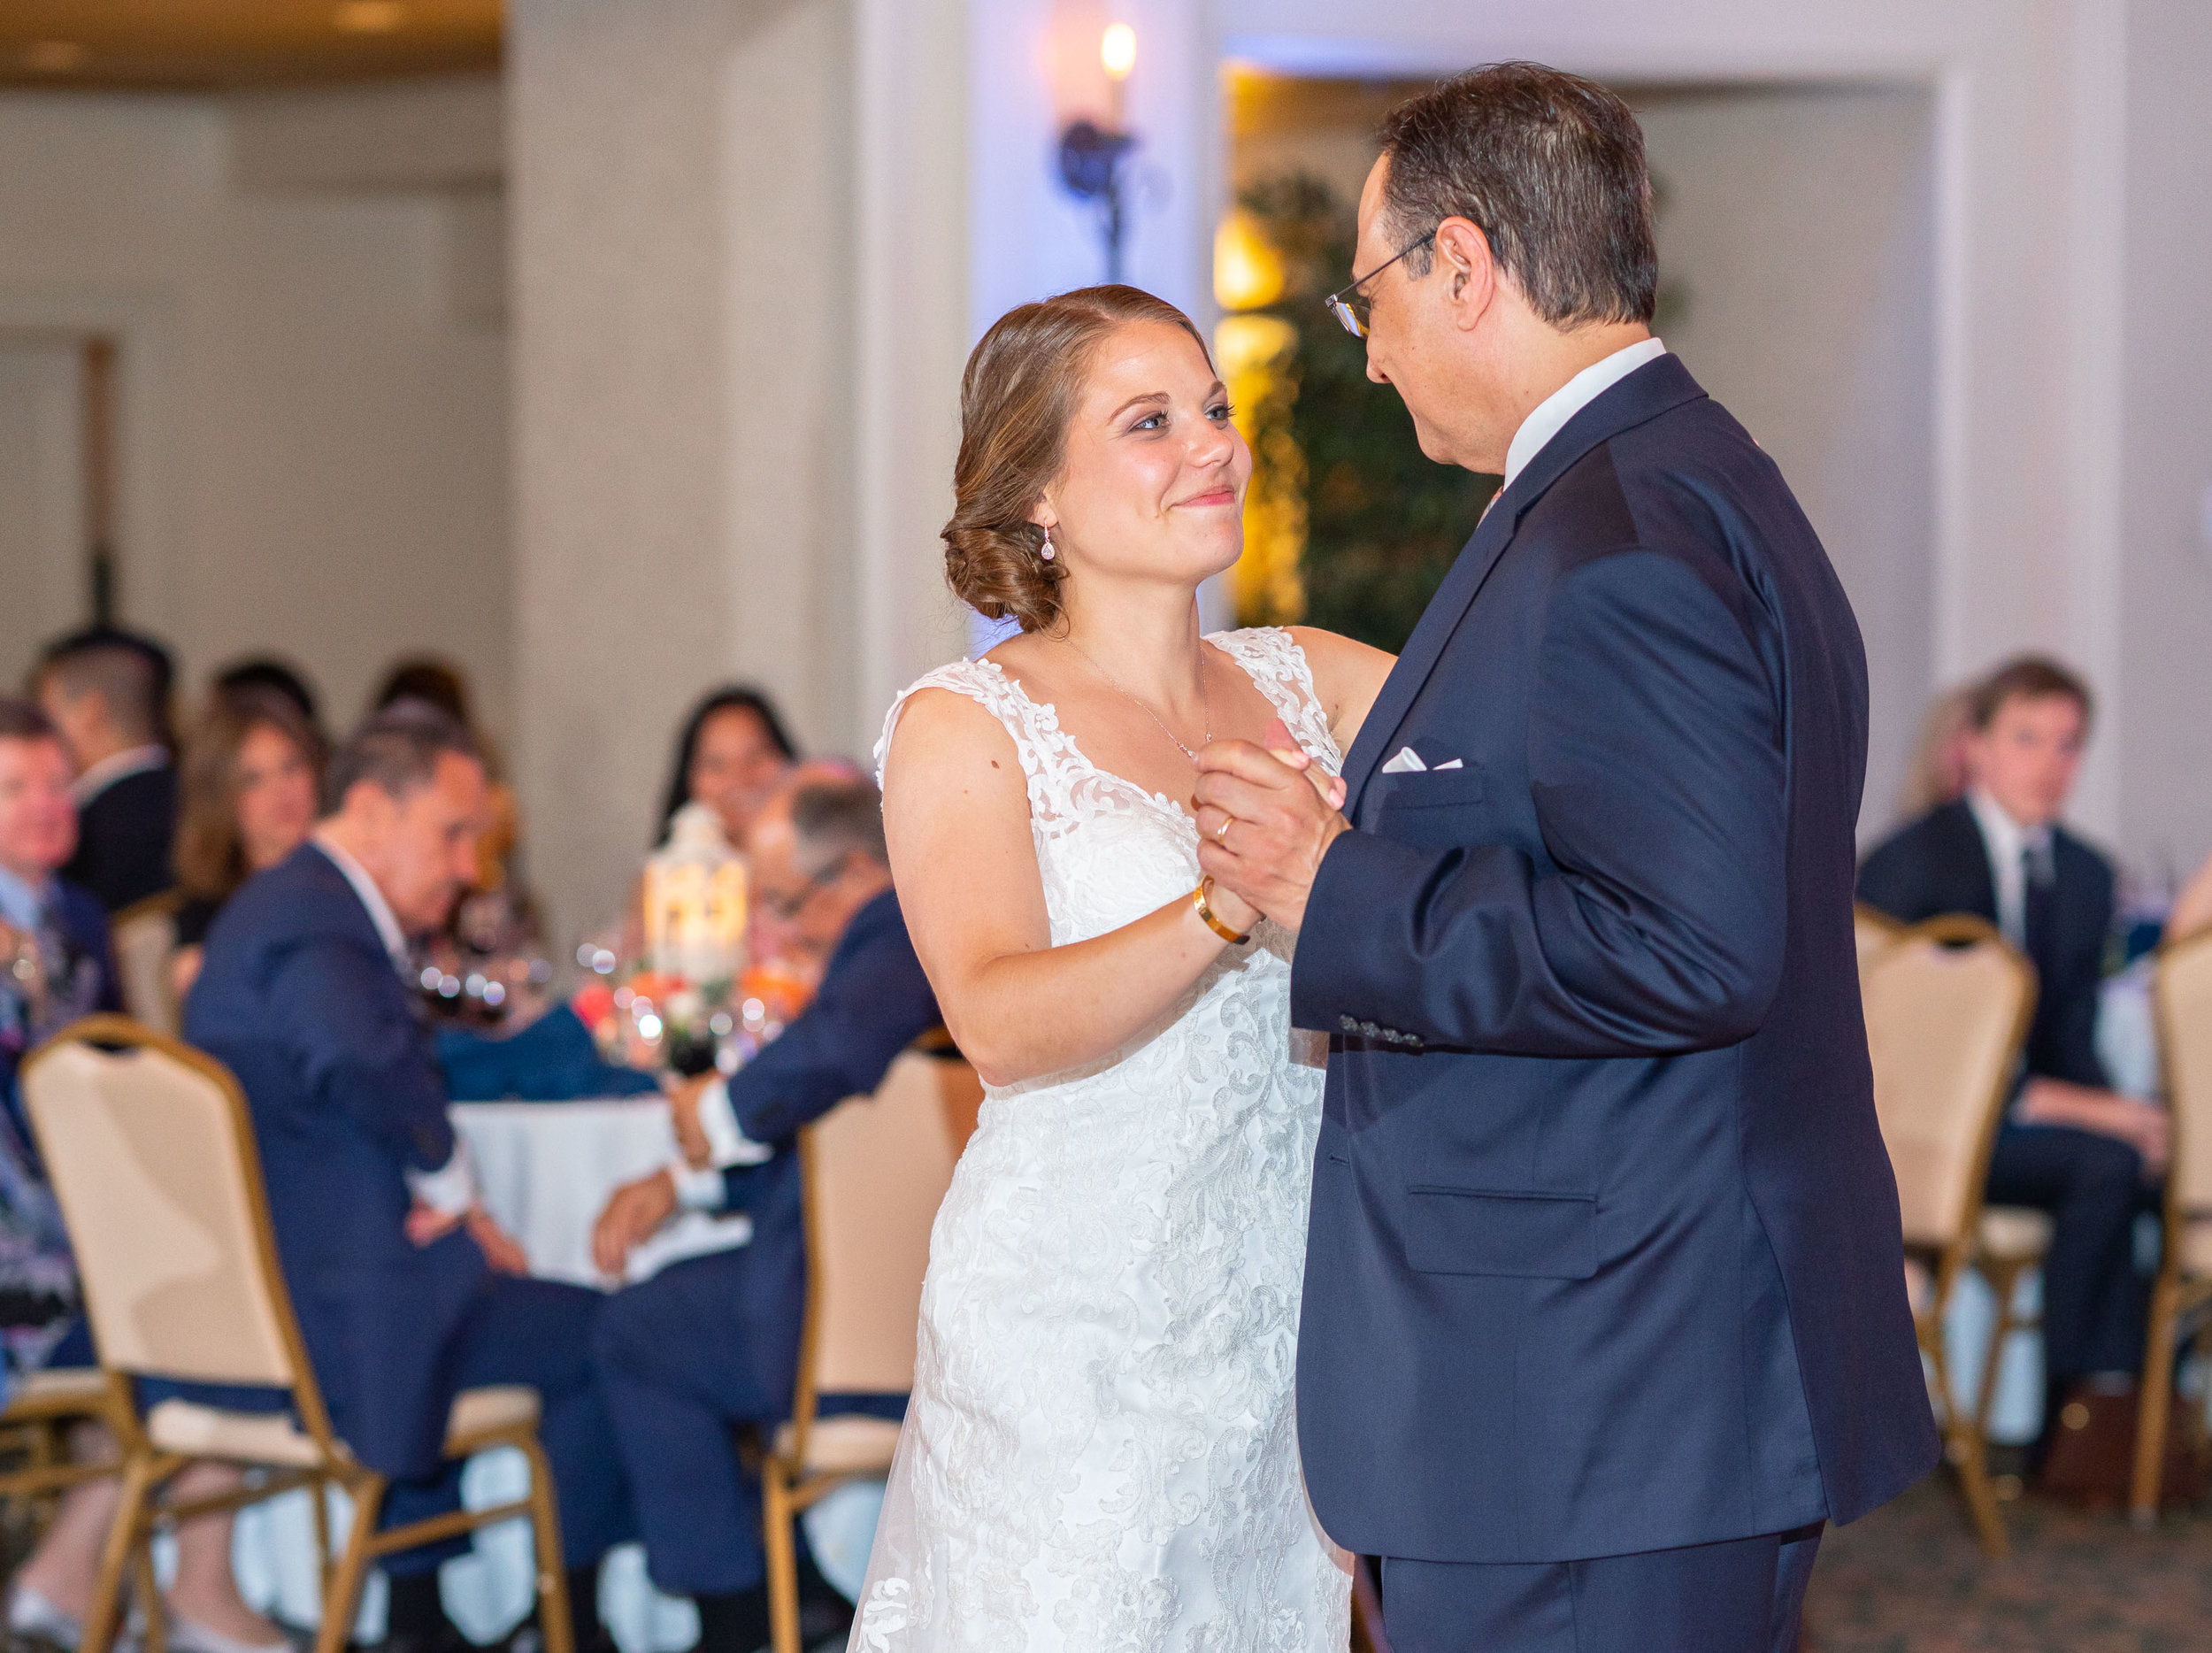 Father daughter dance in evening ballroom during wedding reception at Rehoboth Beach Country Club